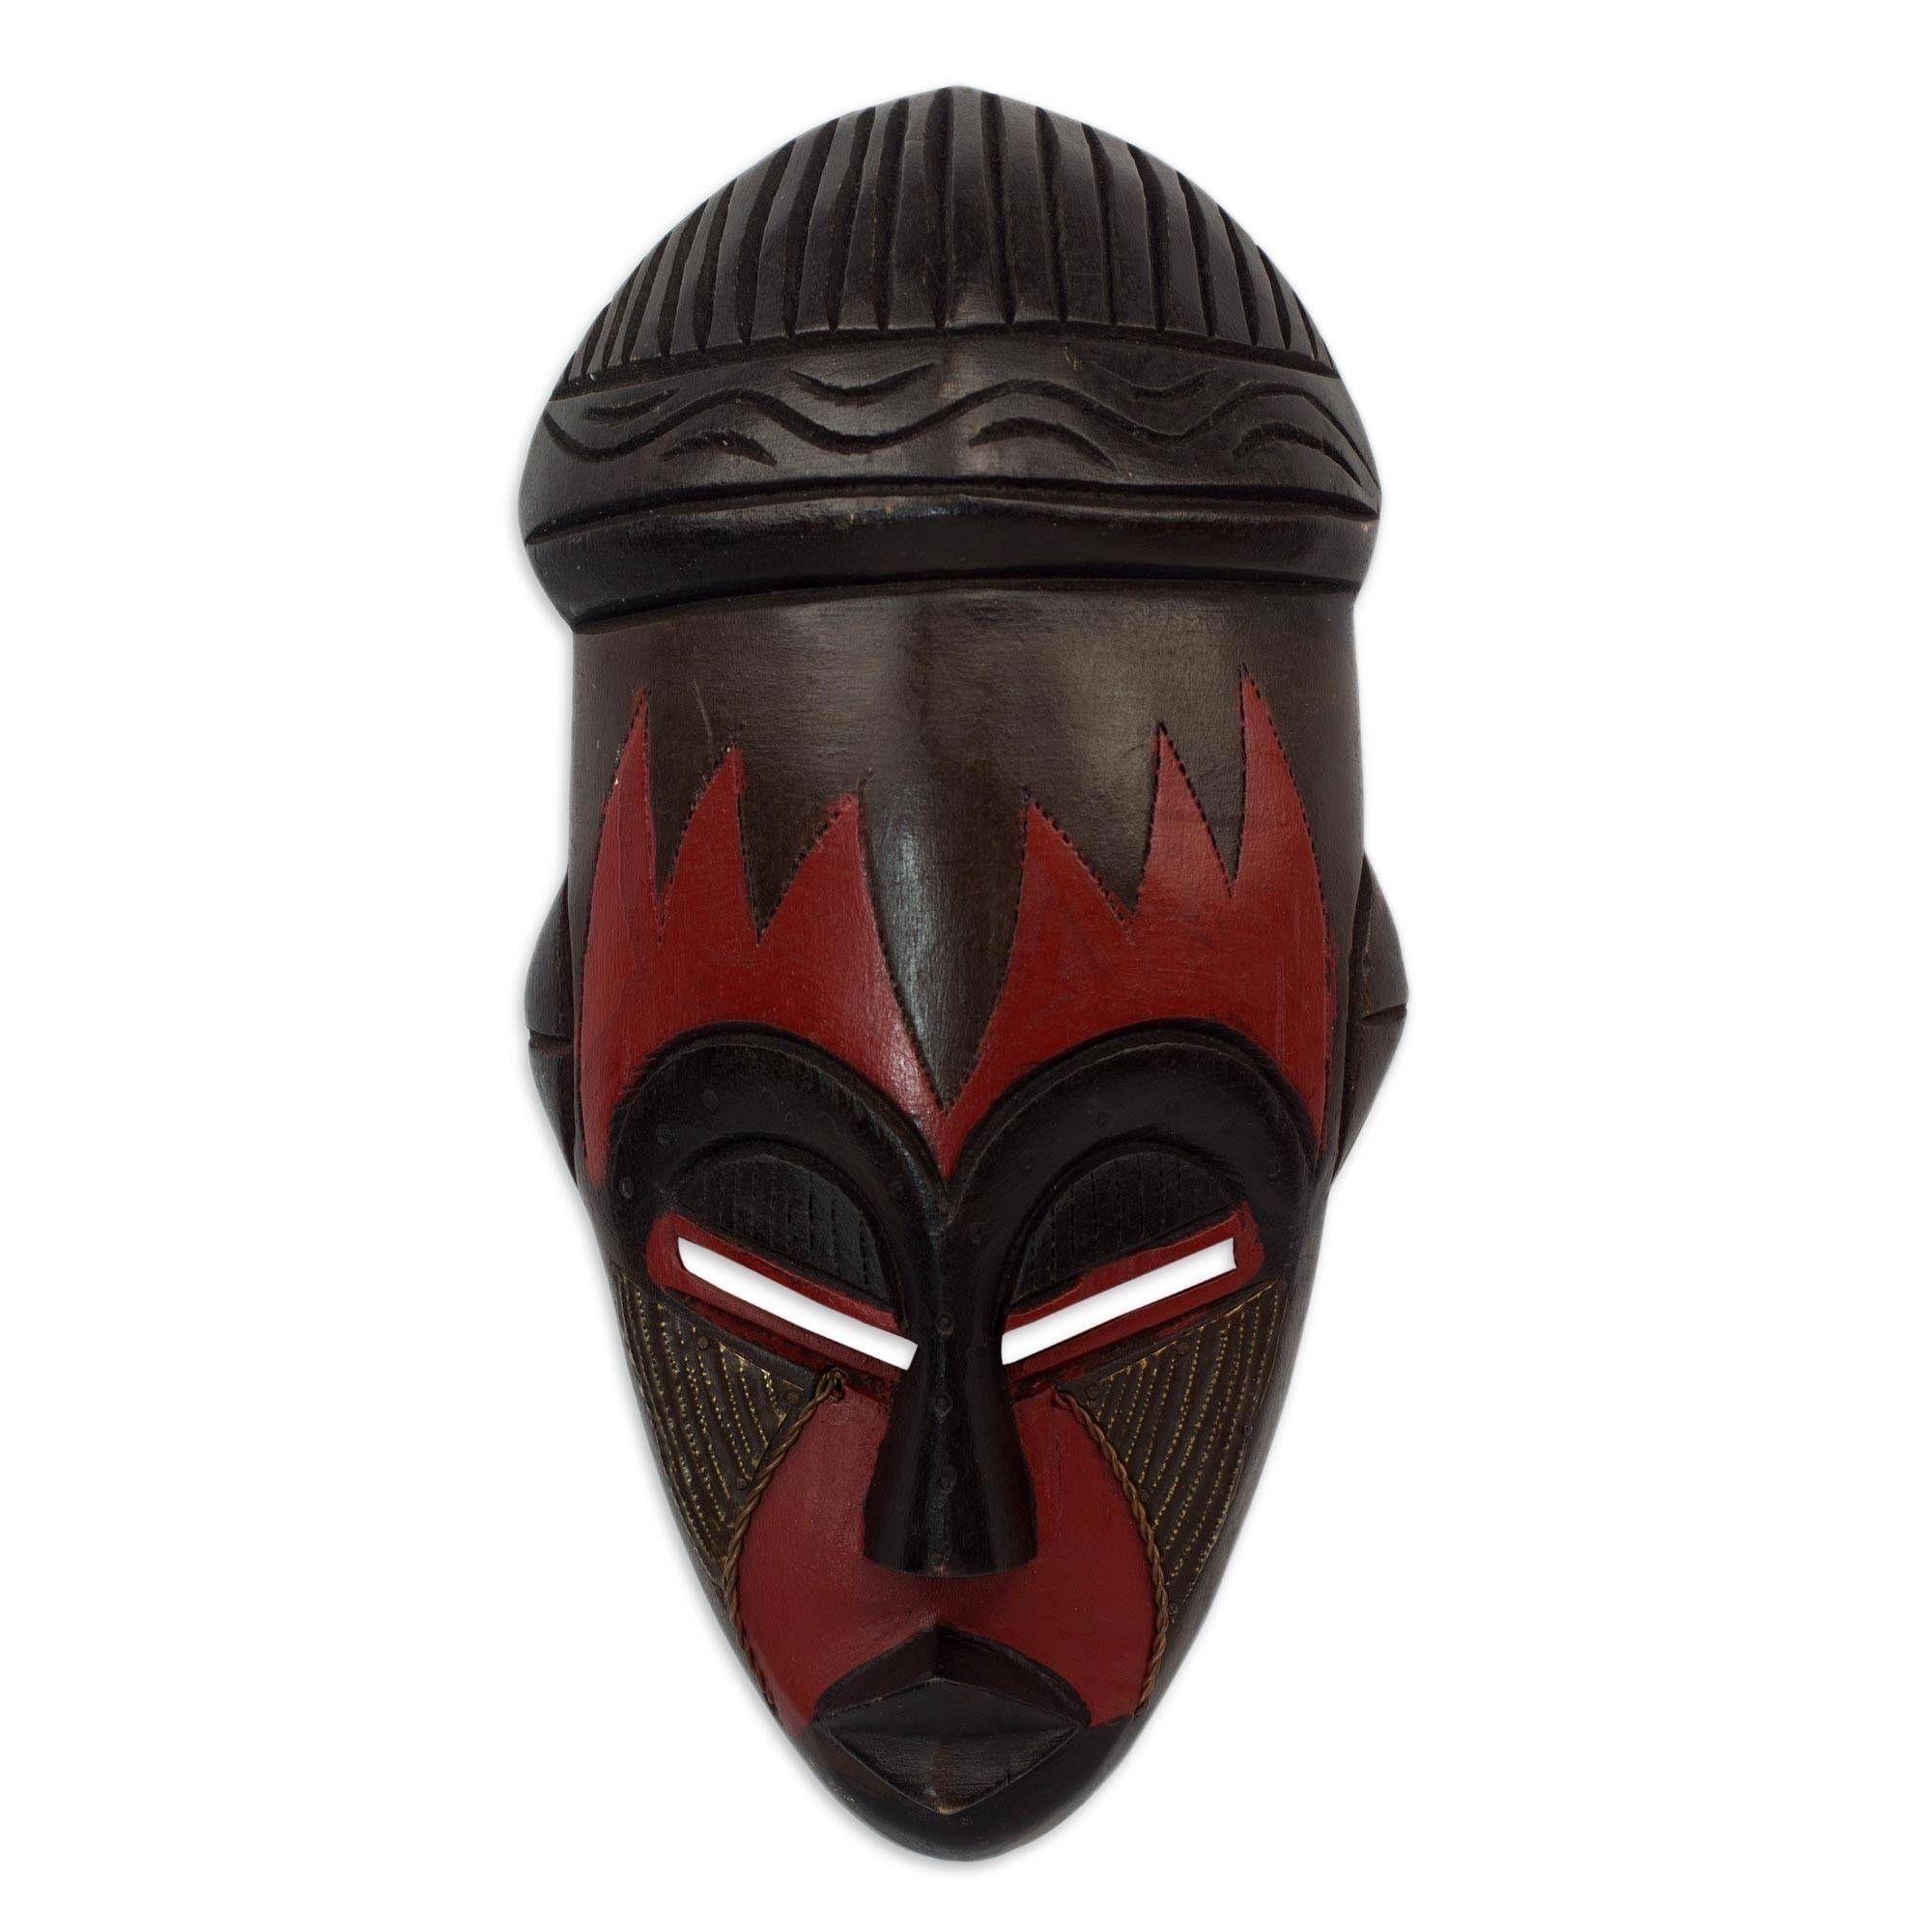 Wooden Tribal Mask Wall Art For Well Known Masks – Handcrafted Global, Tribal & African Masks At Novica (View 5 of 15)